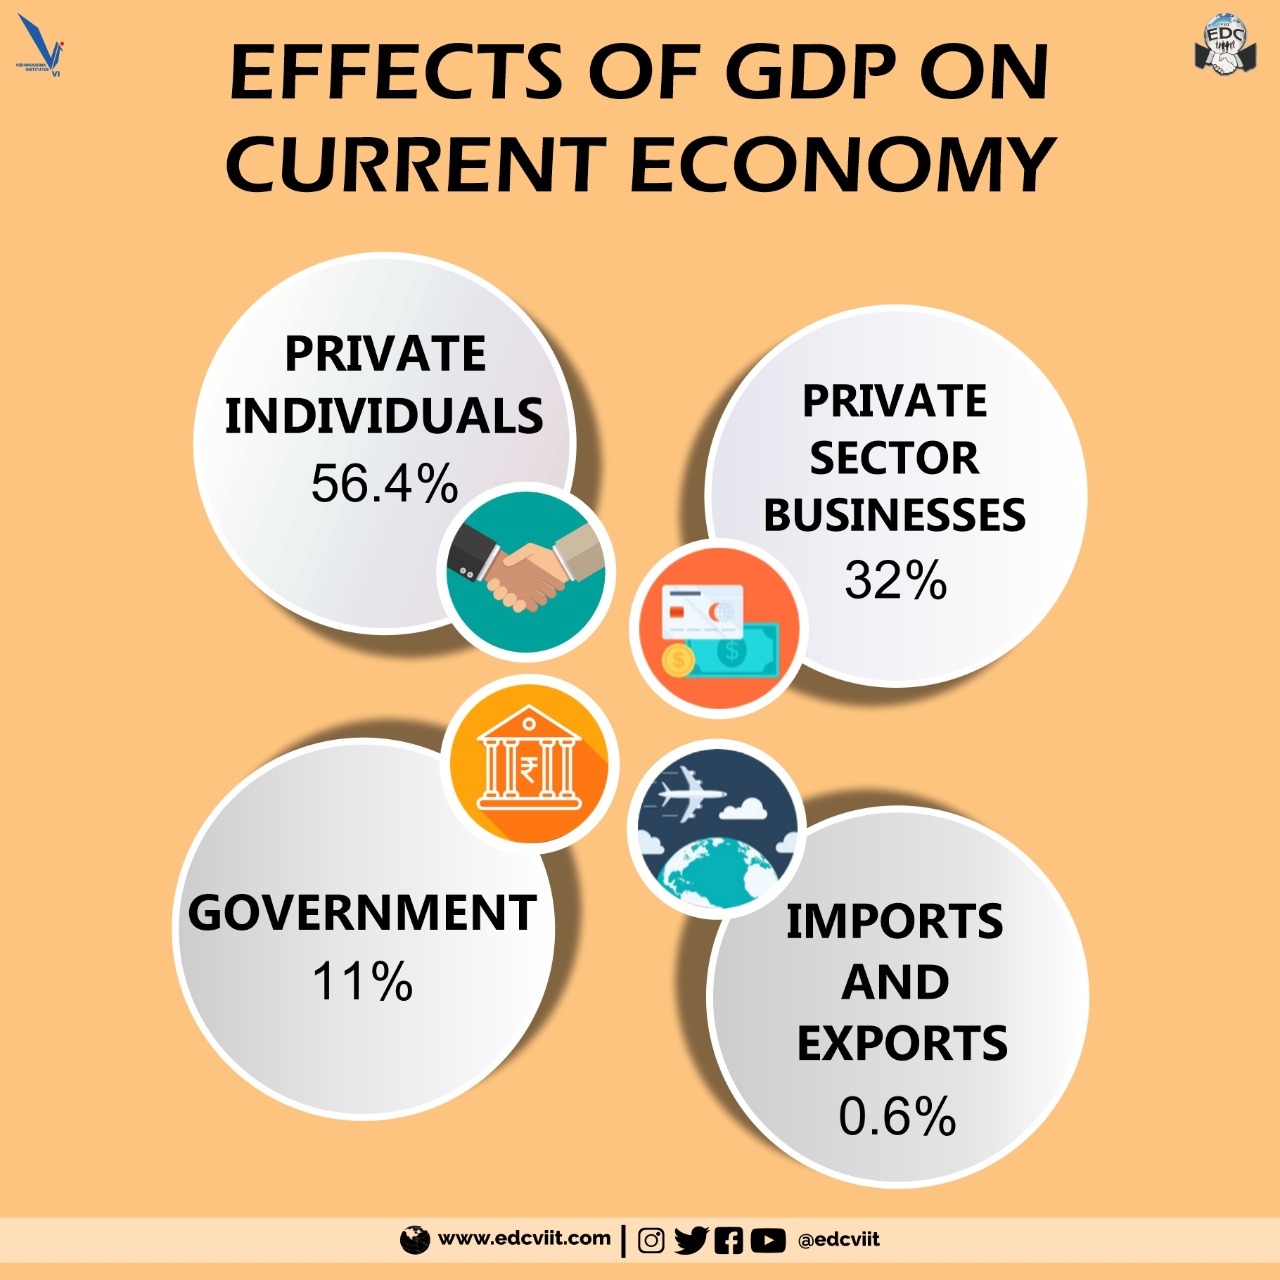 Effect of GDP on the Current Economy